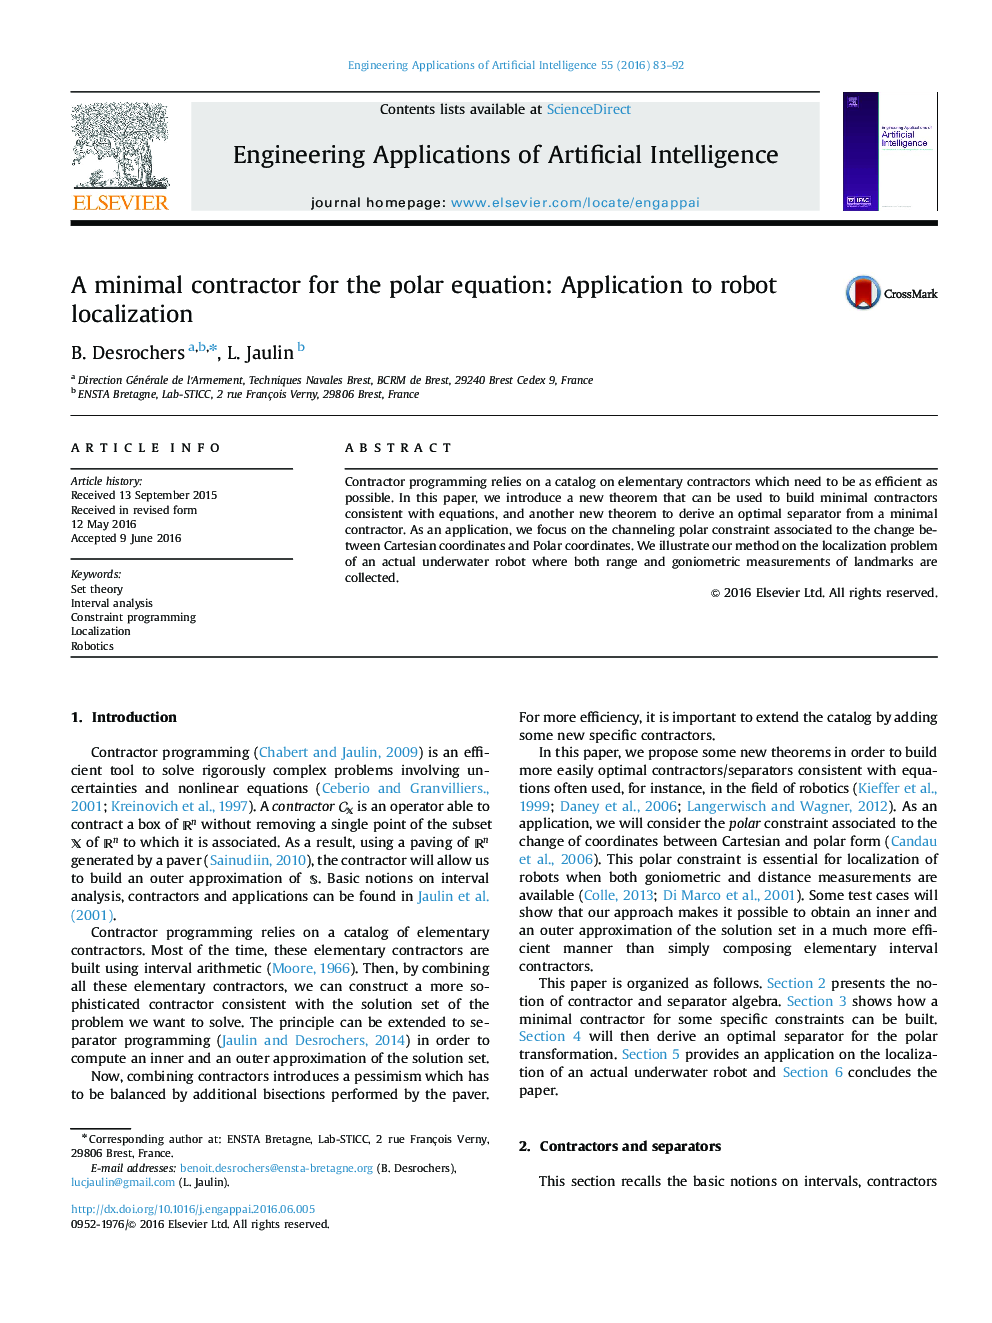 A minimal contractor for the polar equation: Application to robot localization